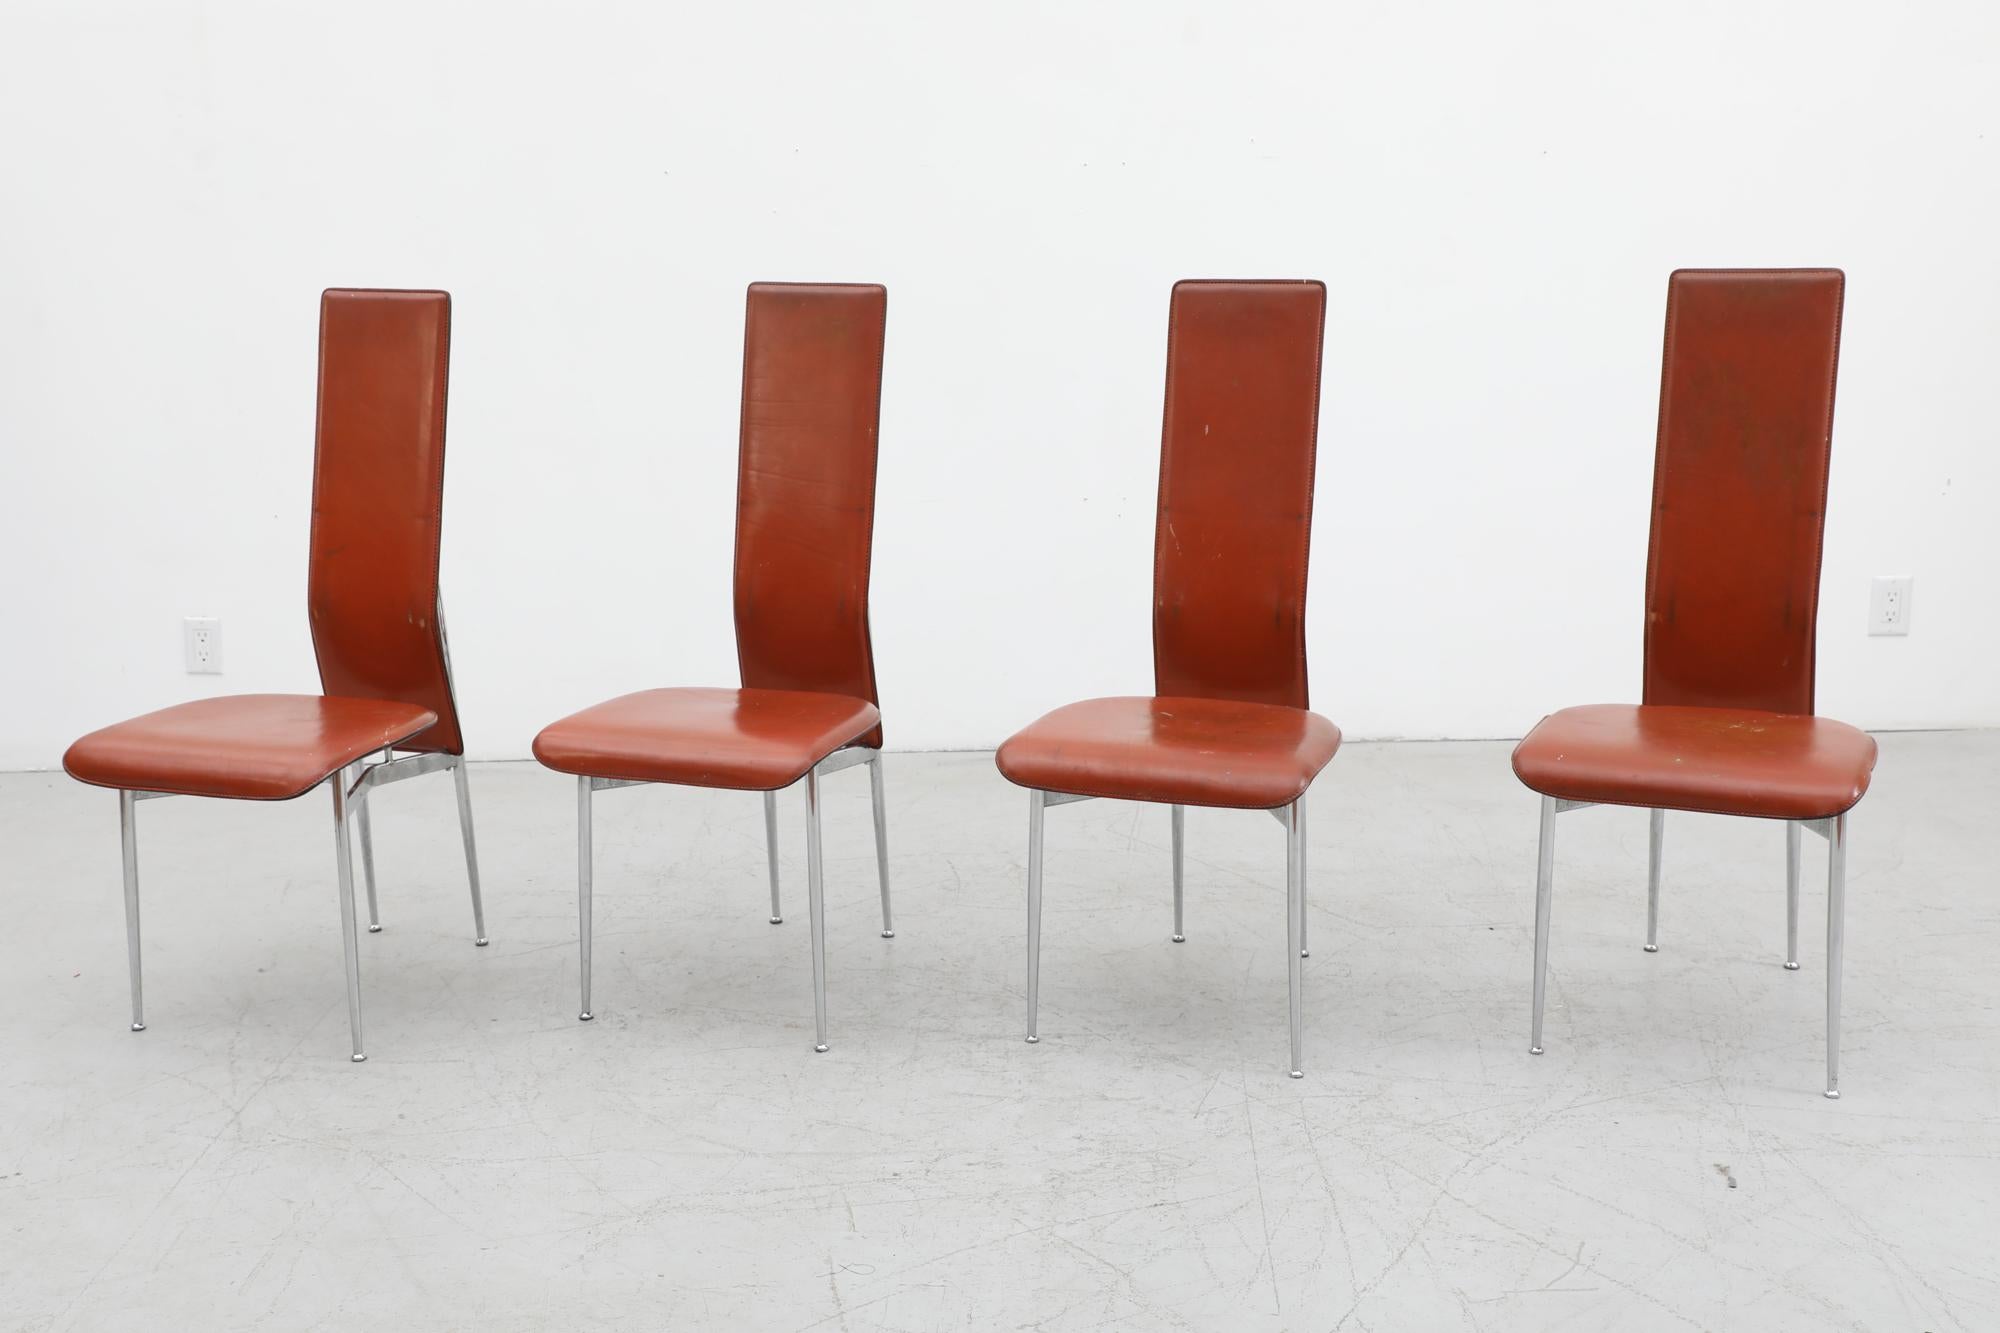 Italian Set of 4 'S44' High Back Cognac Leather Chairs by Vegni & Gualtierotti for Fasem For Sale